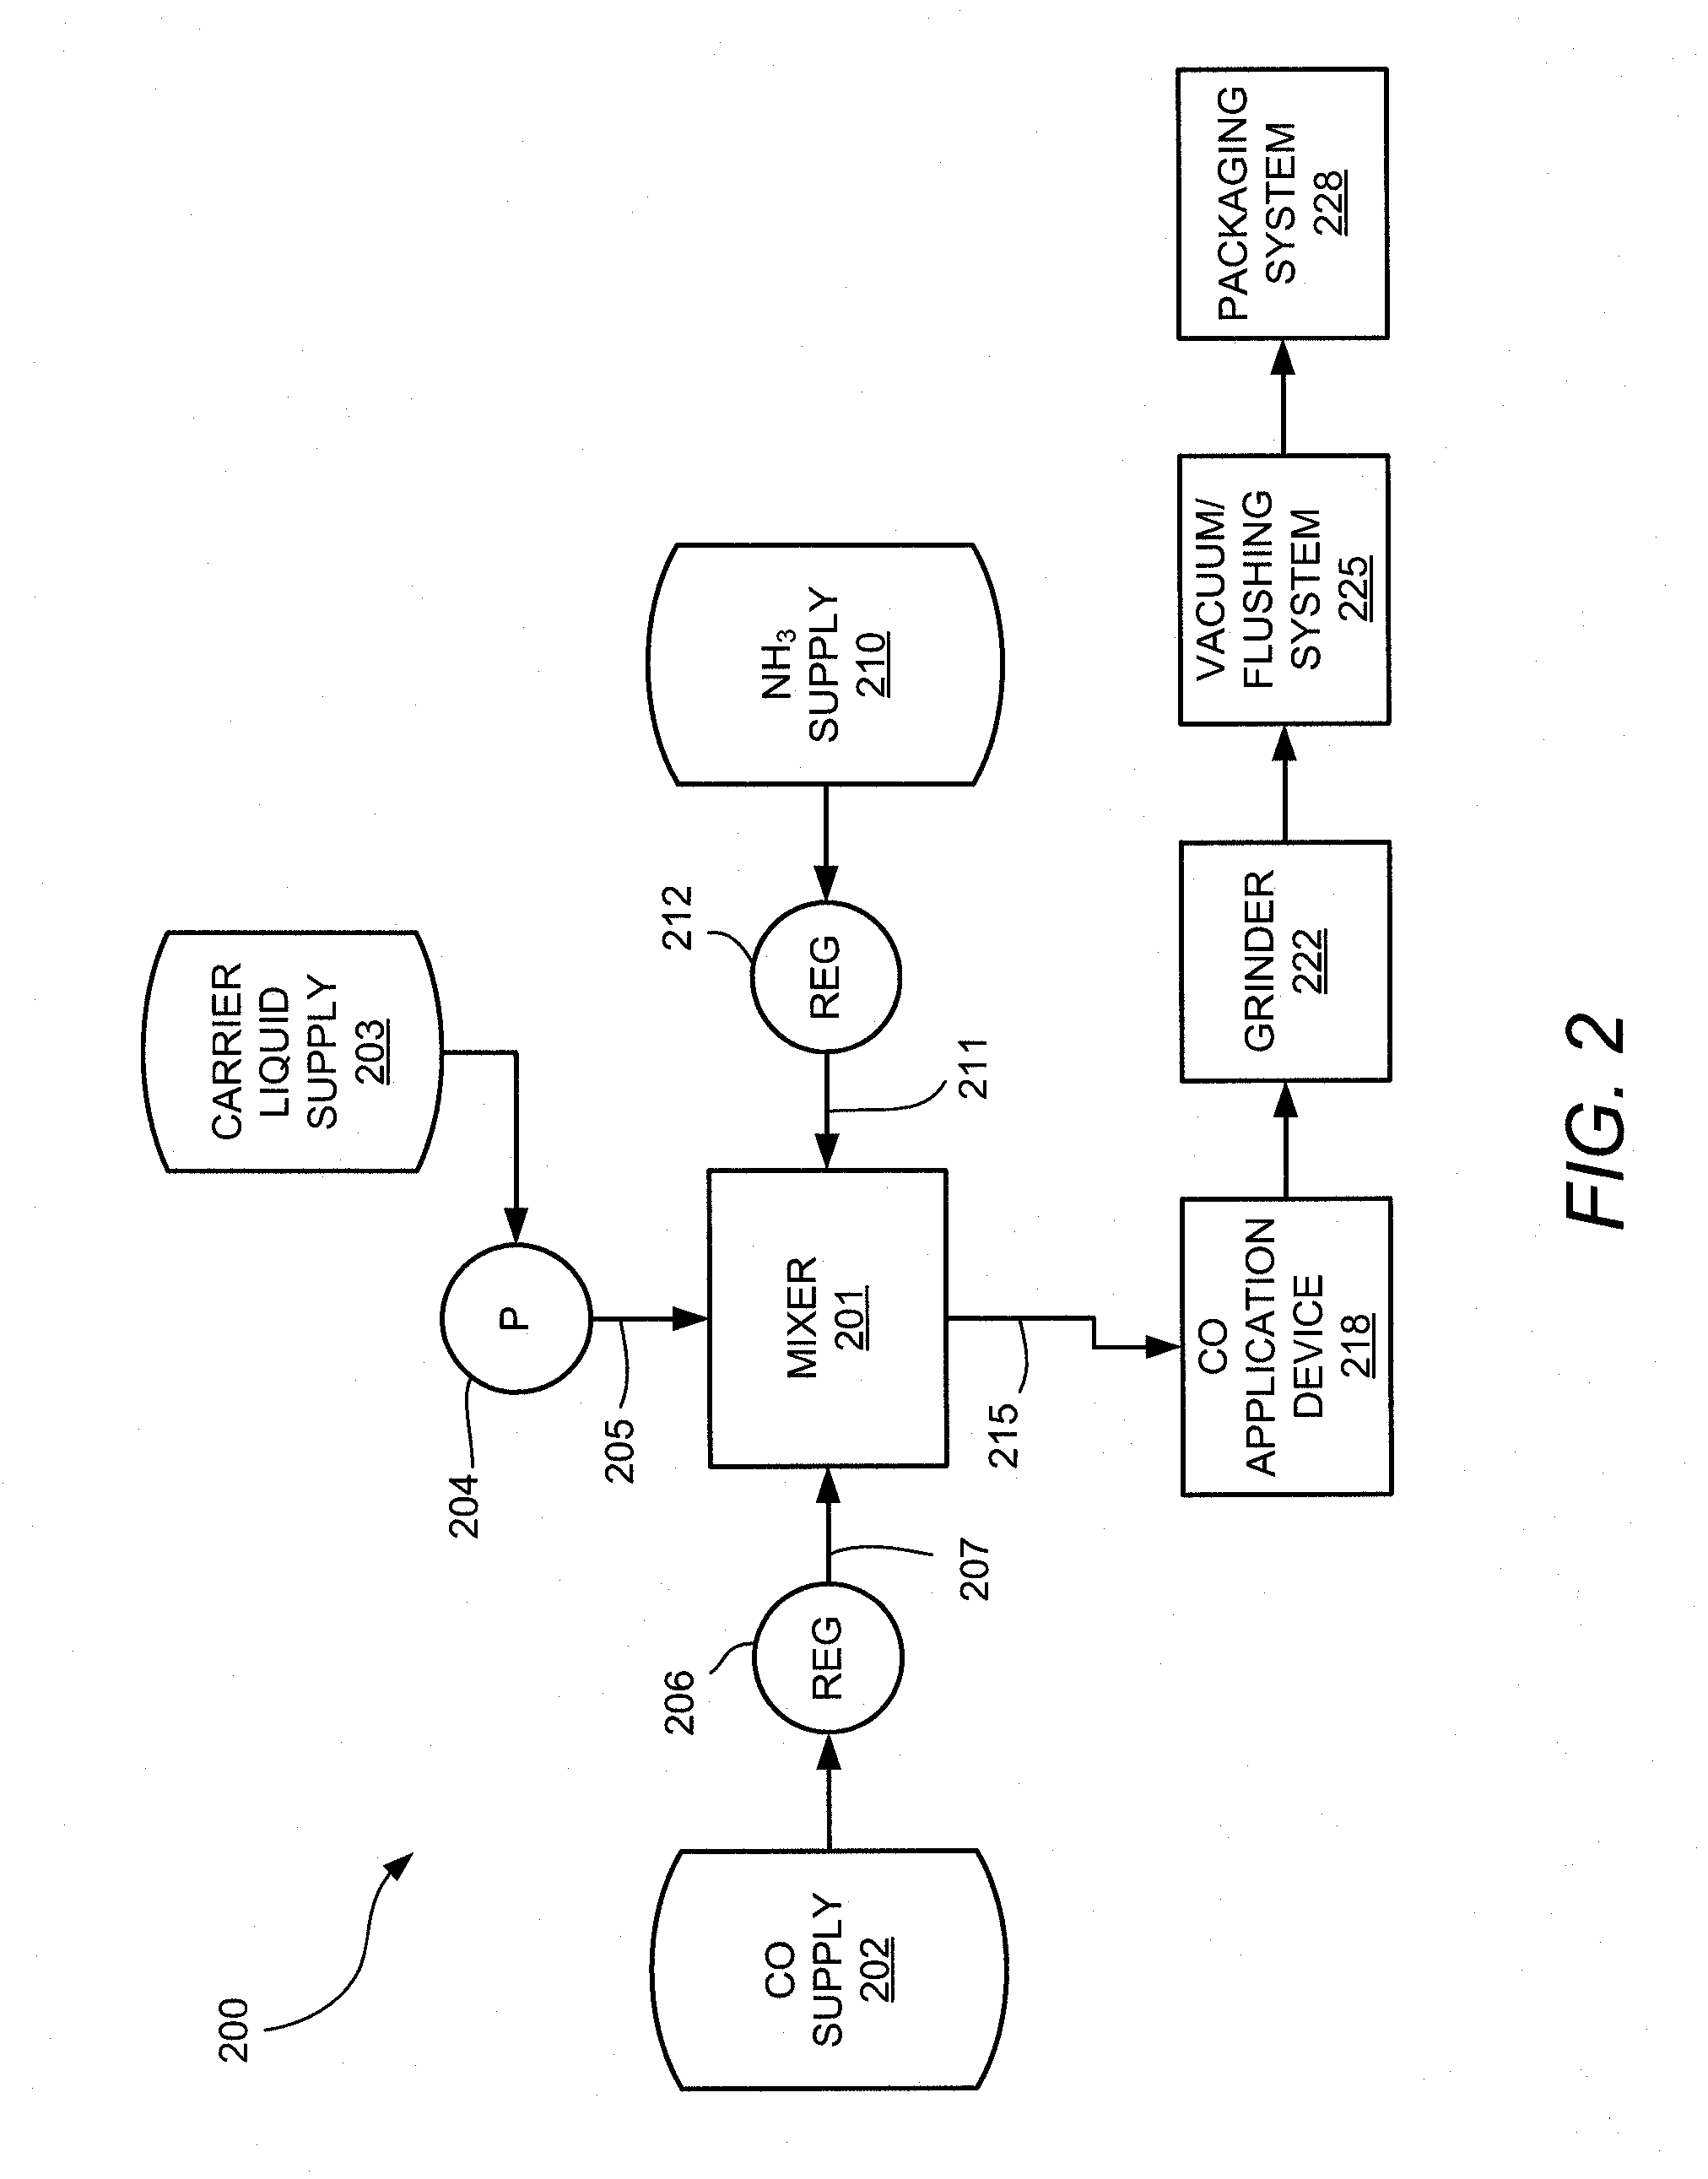 Method for producing a carbon monoxide-treated comminuted meat product